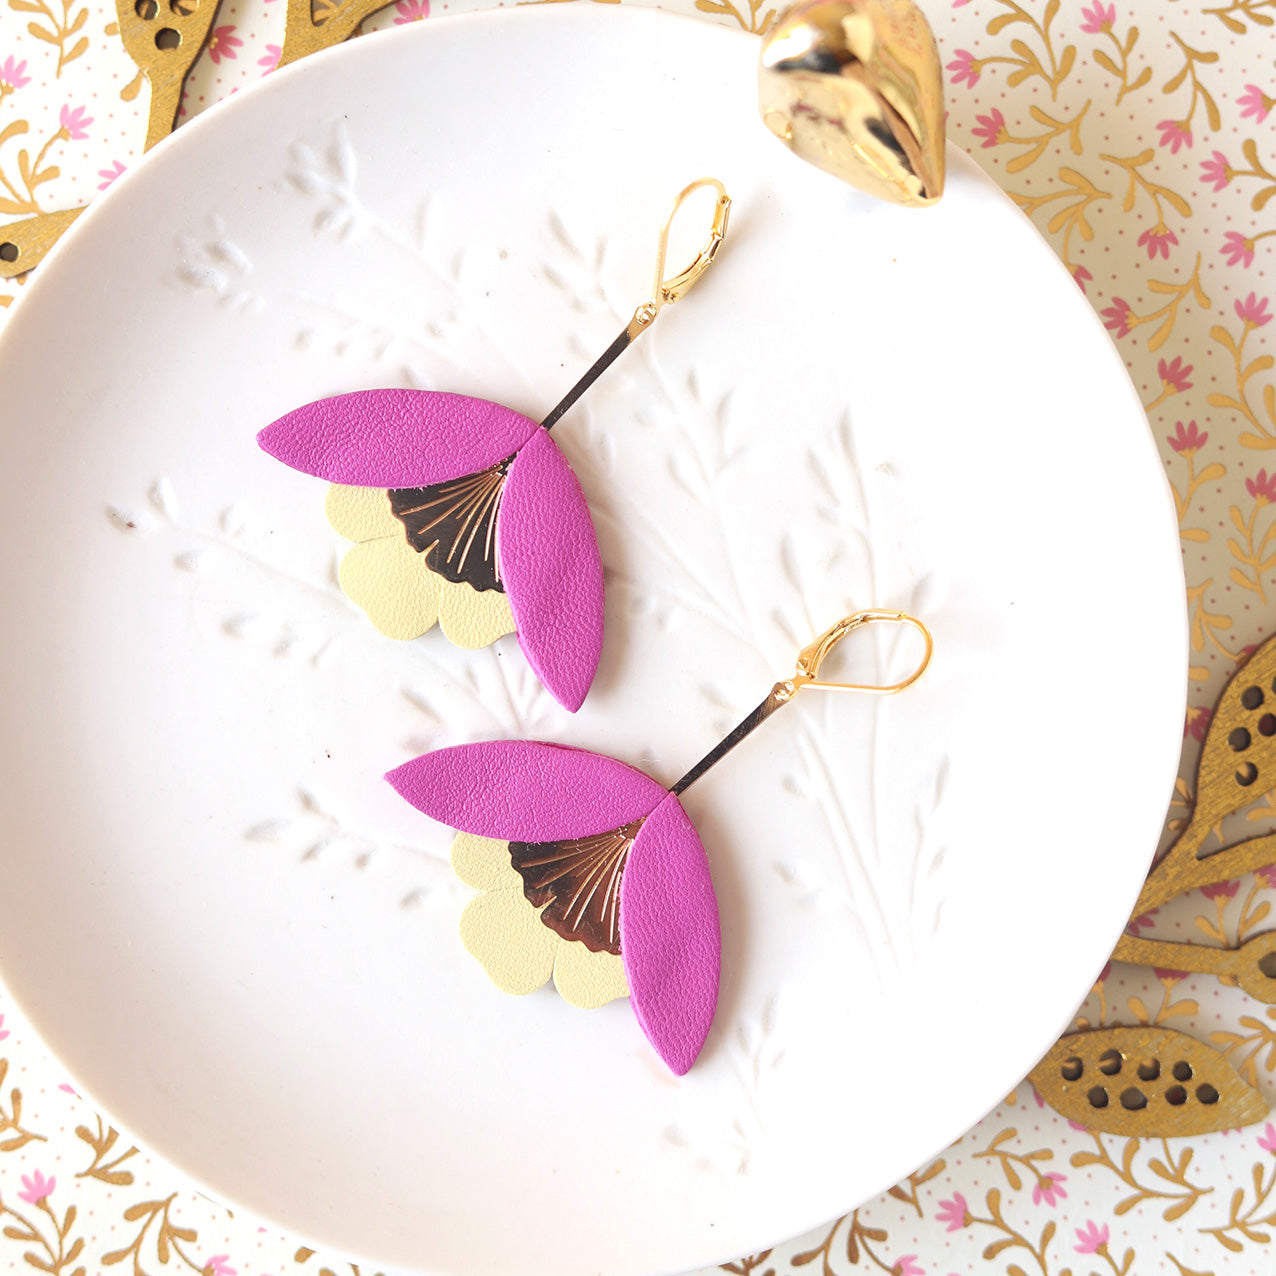 Ginkgo Flower earrings in fuchsia pink and pale yellow leather